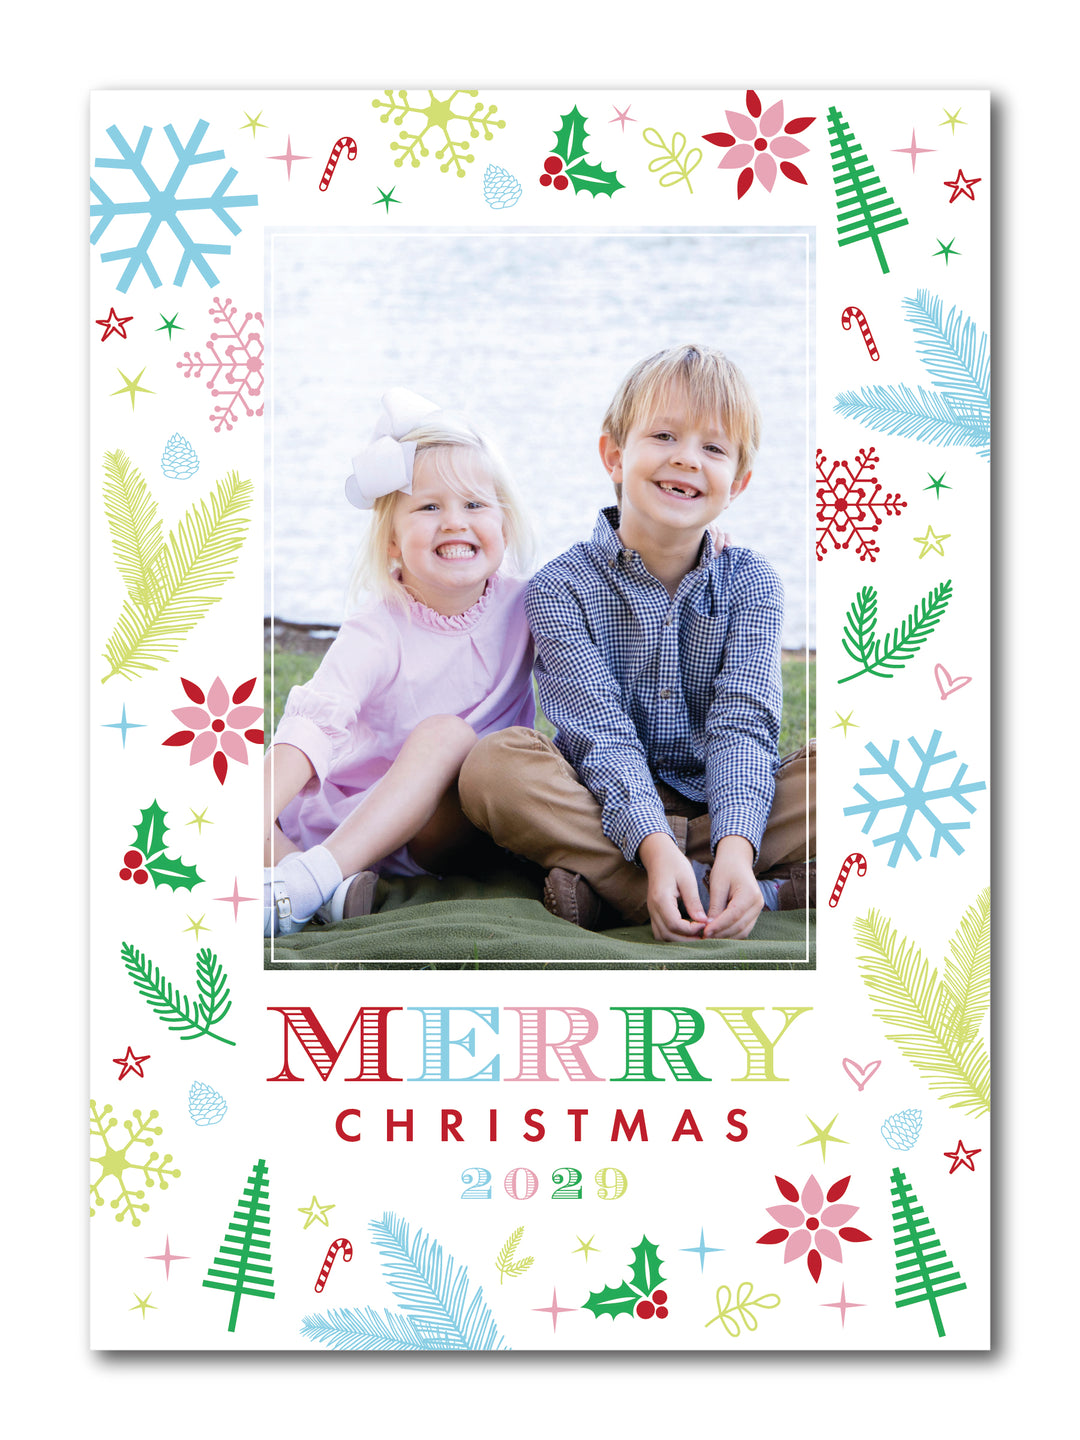 The William Christmas Card